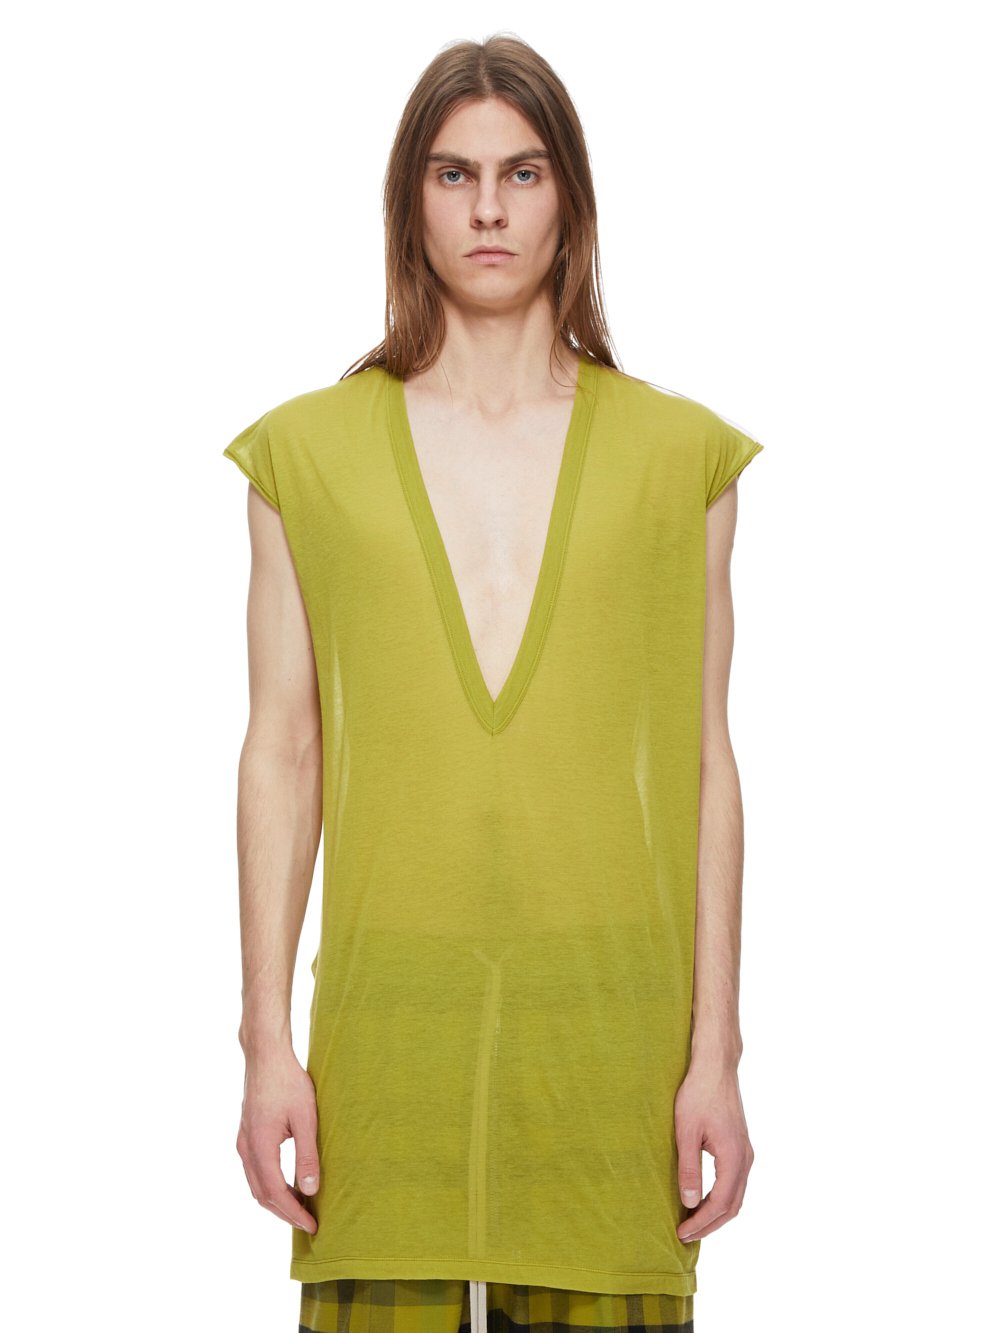 RICK OWENS FW23 LUXOR DYLAN T IN ACID YELLOW UNSTABLE COTTON